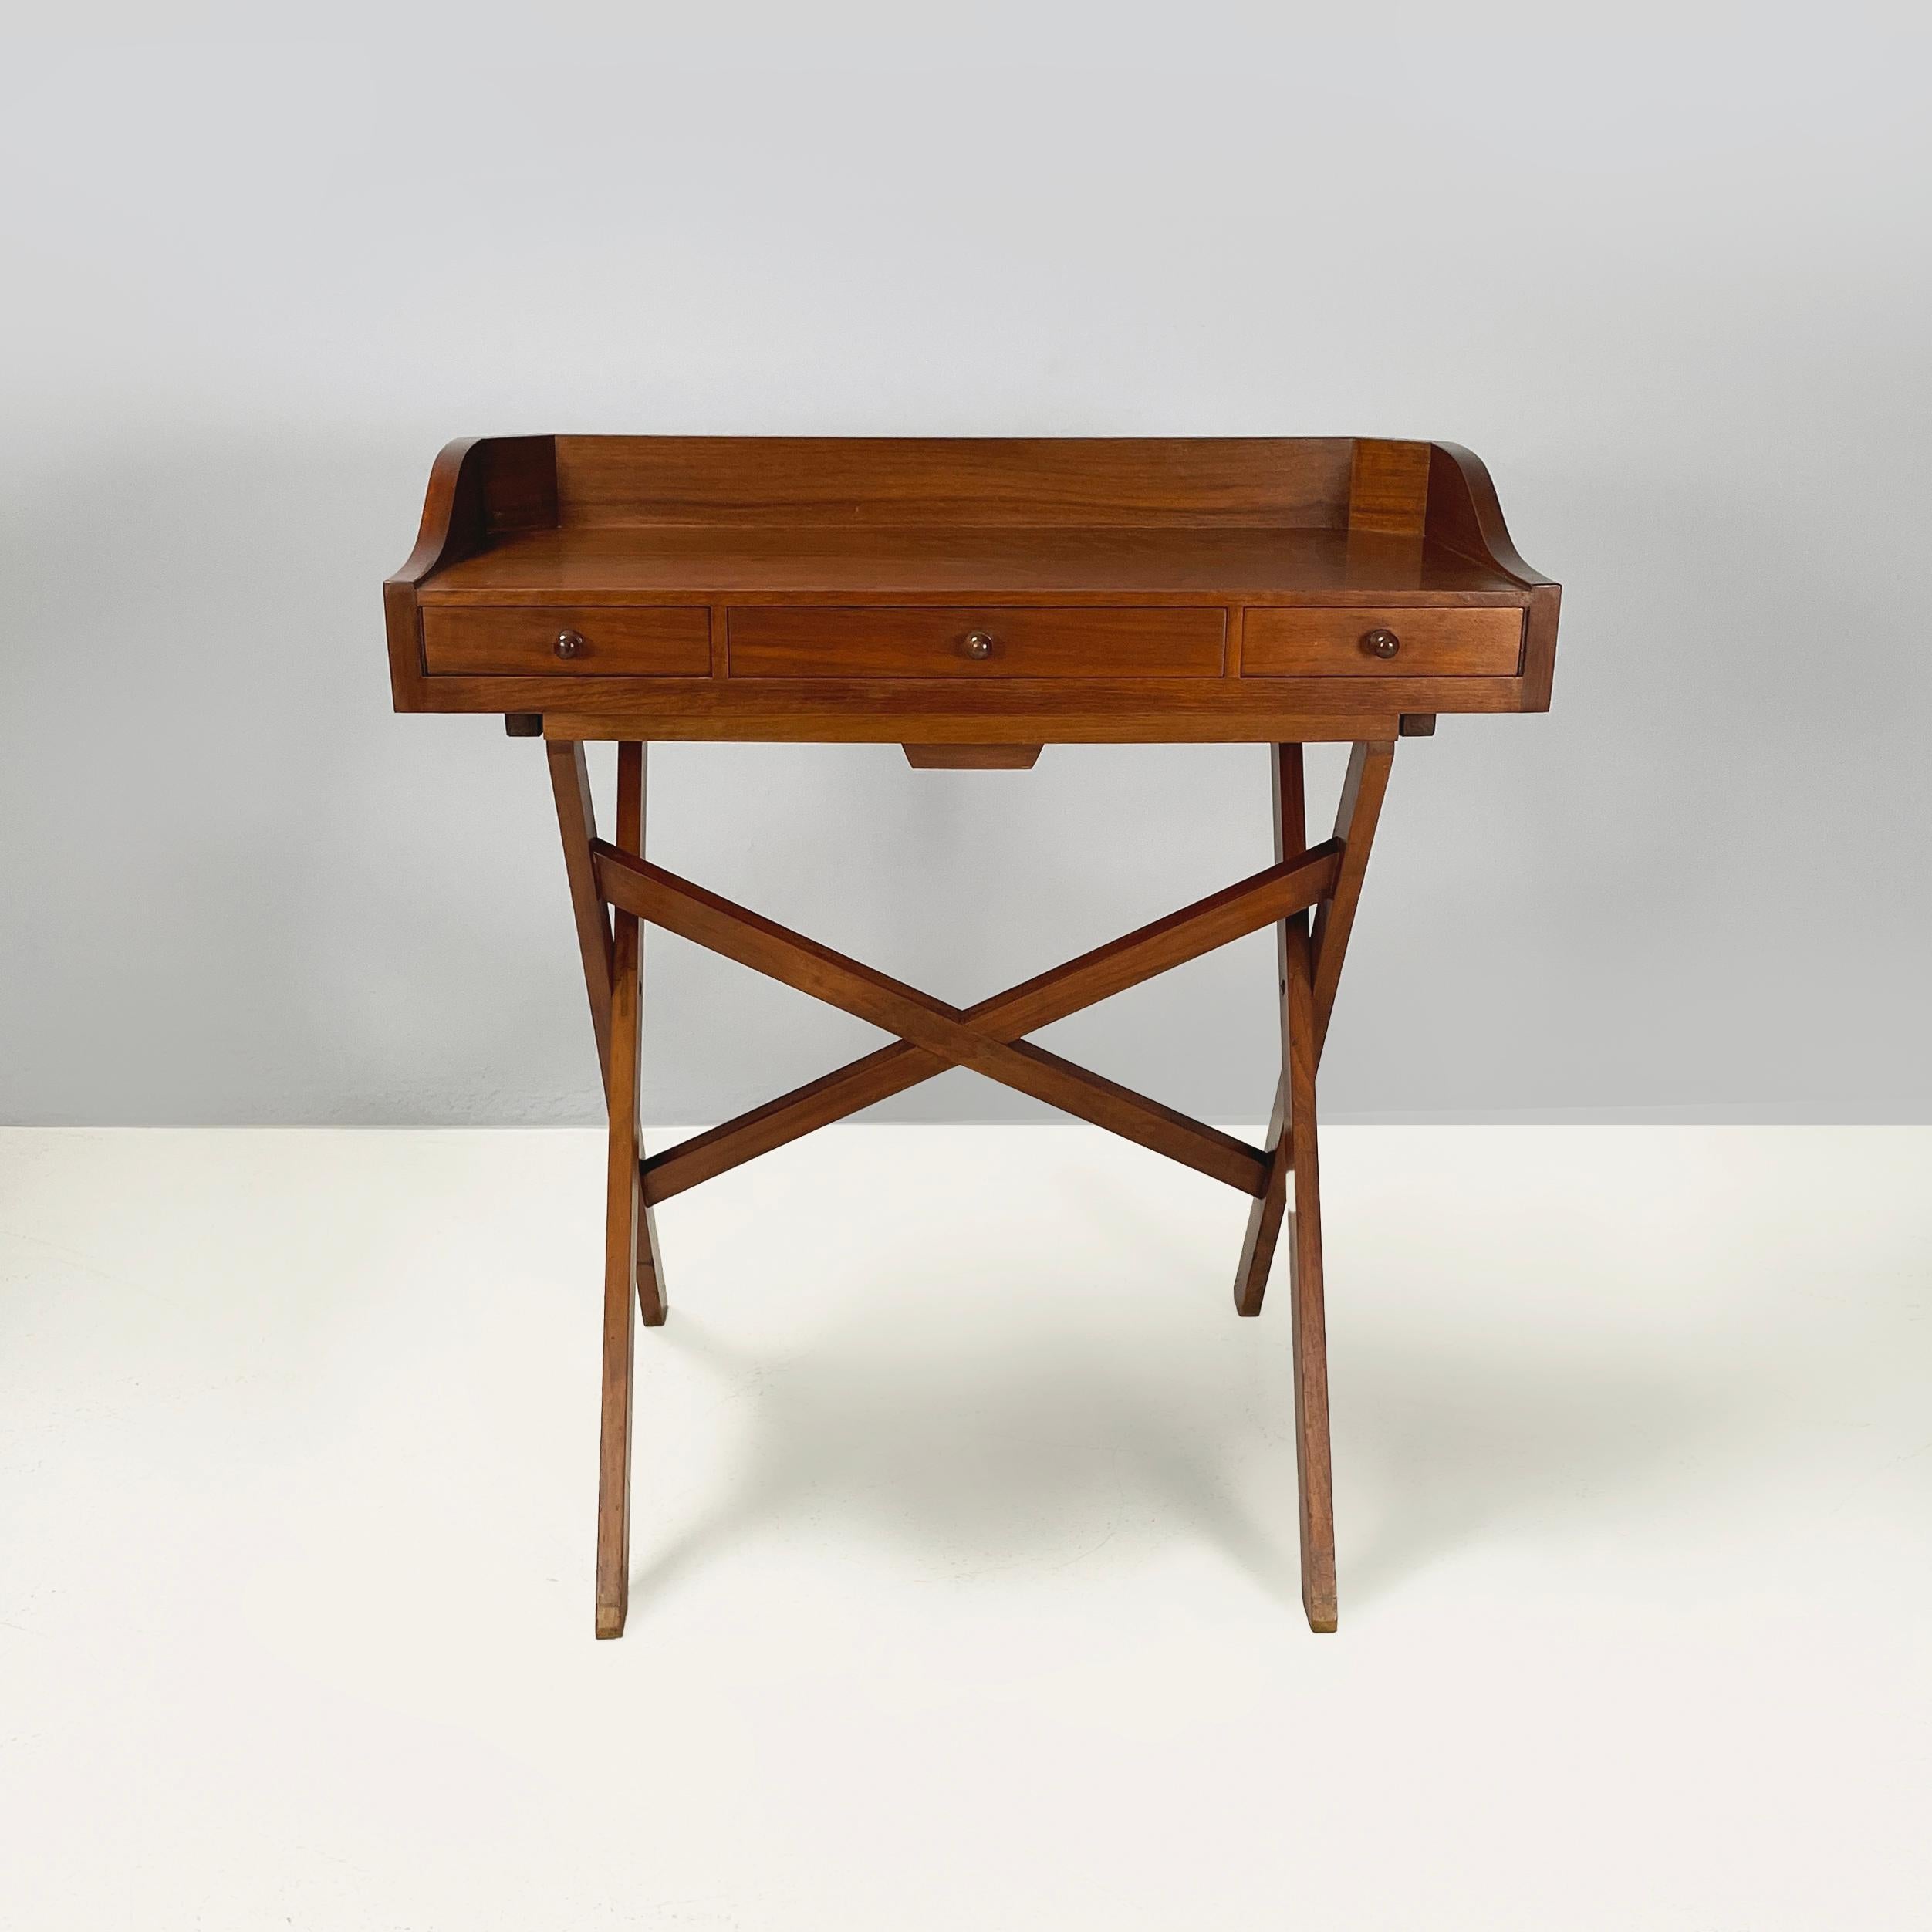 Italian mid-century modern Wooden desk with drawers and retractable shelf, 1960s
Desk entirely in wood. The shaped top has raised sides and 3 rectangular drawers with spherical handles. Furthermore, the desk features a retractable shelf. The slat